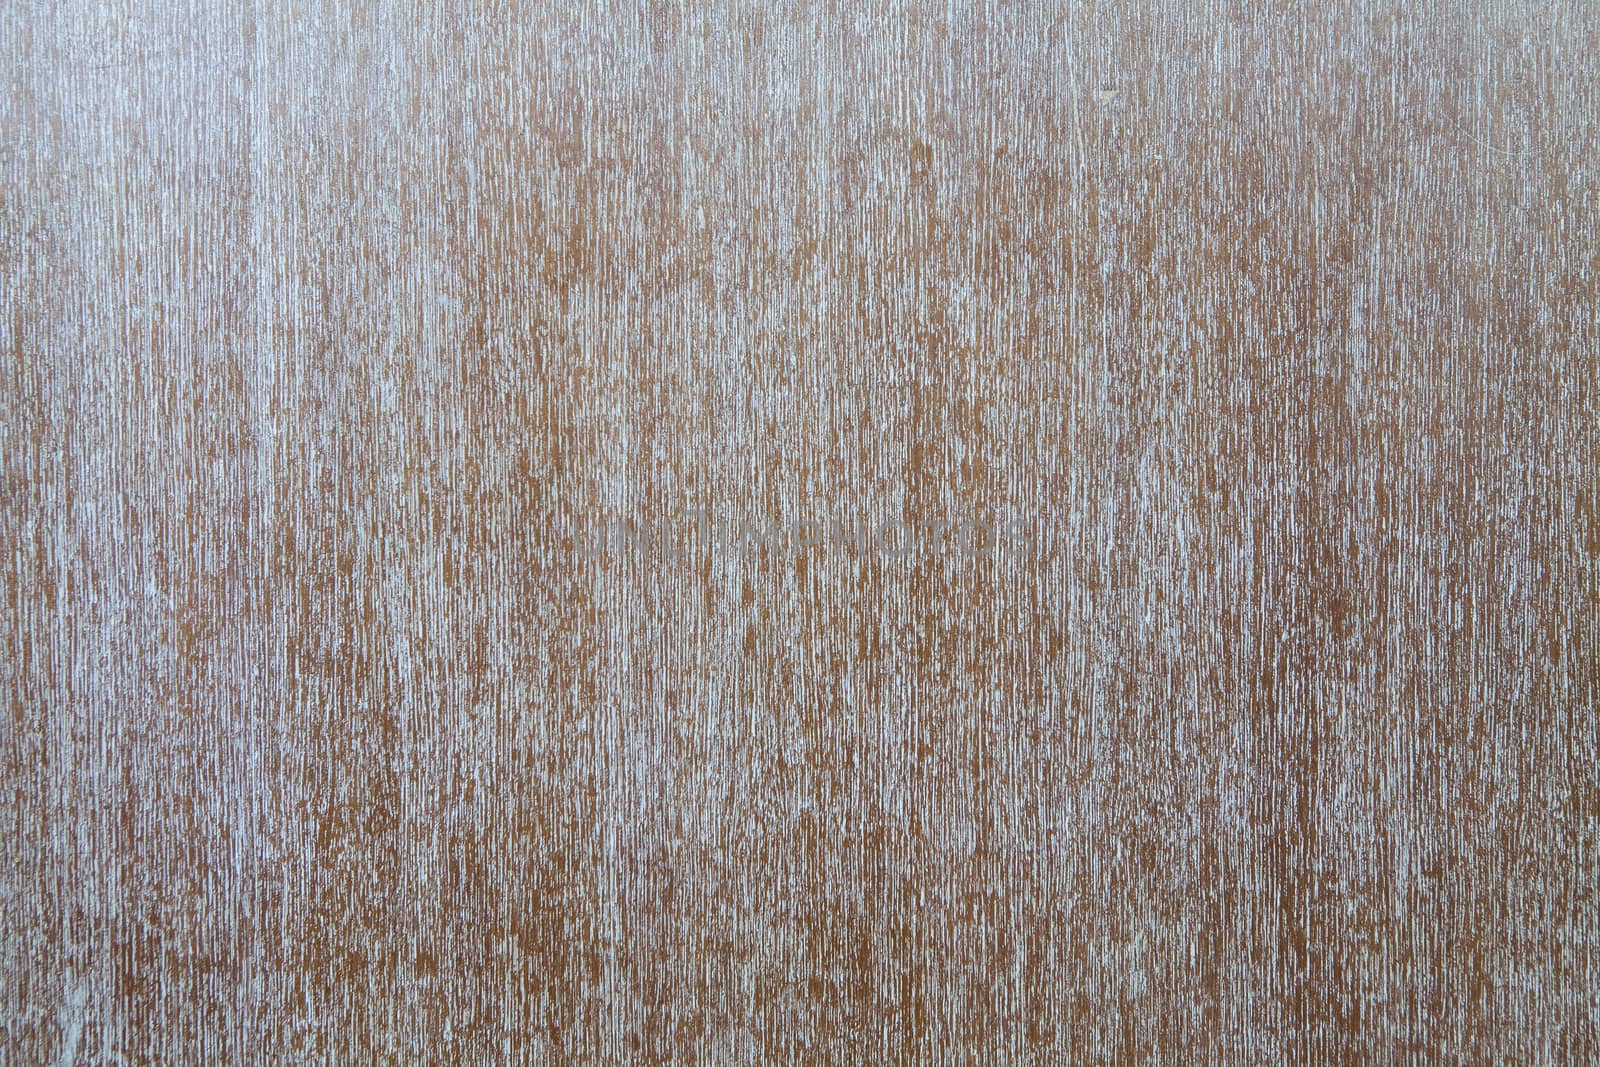 Seamless Wood Texture in a Grainy Brown,Wood background